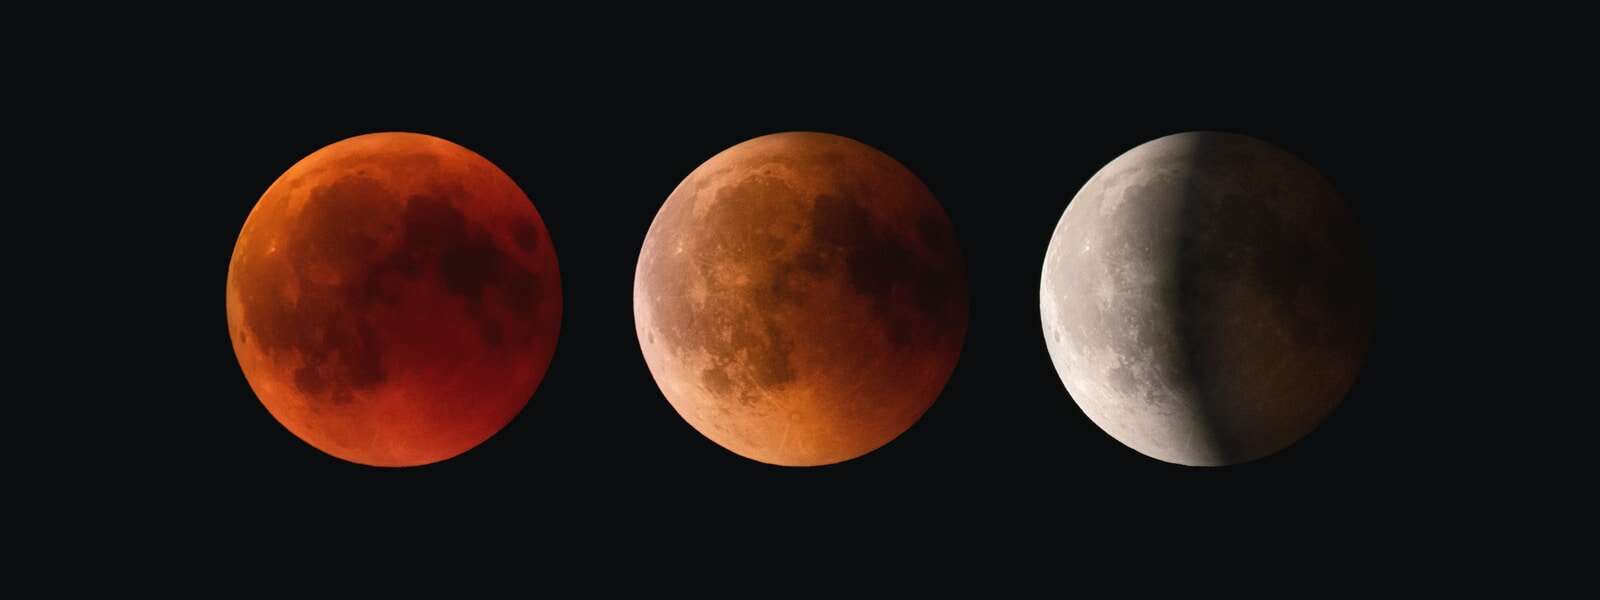 The moon during a different phases of a lunar eclipse. The first moon is full and red, the second (in the middle of the photo) is orange and partly in shadow, the last moon (to the right of the moon in the middle) is half in shadow and is white. All of the moons are set against a black background.